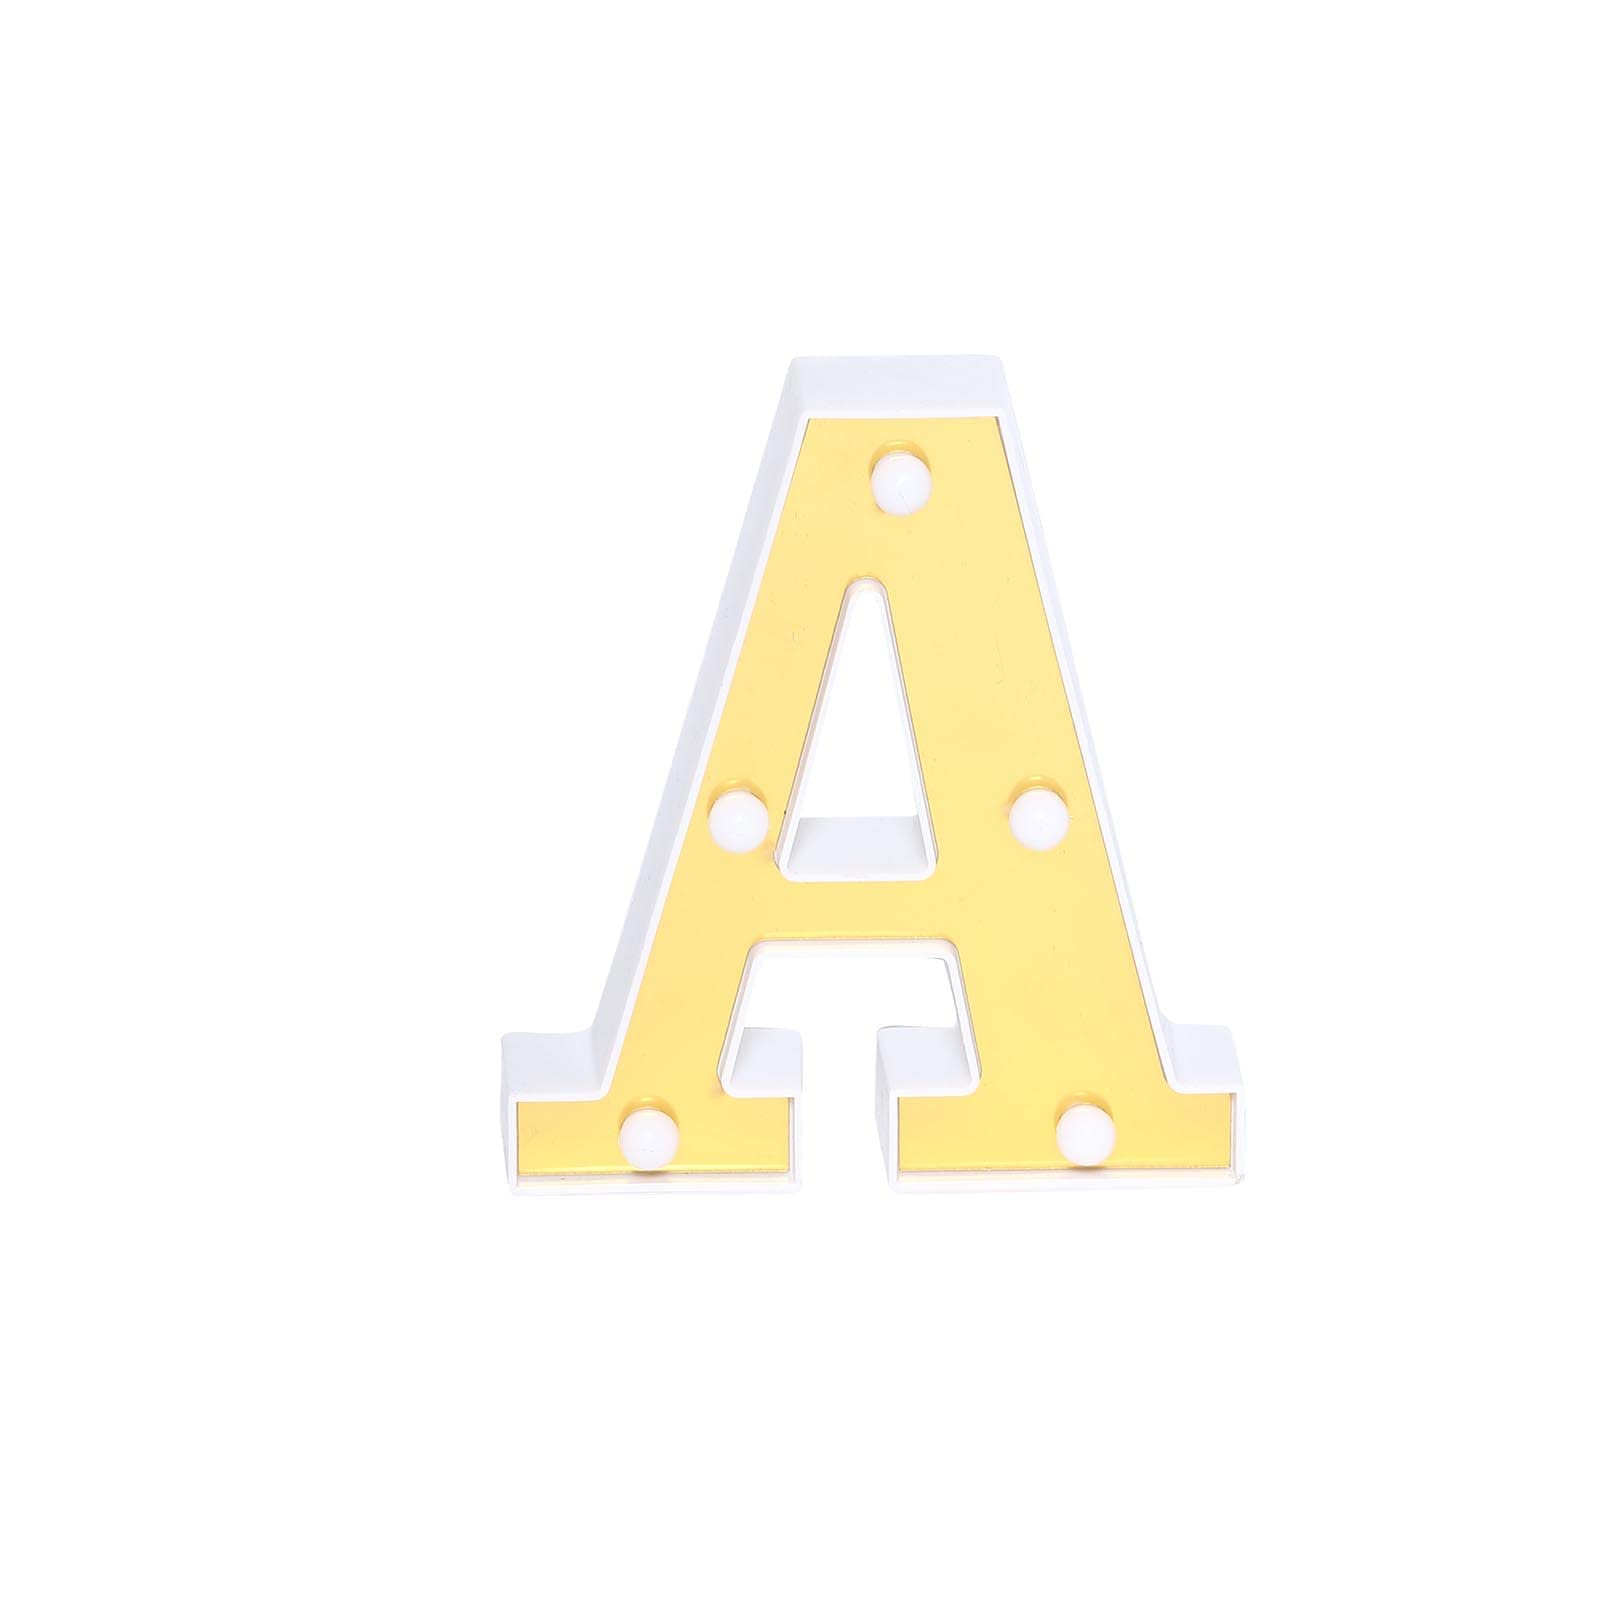 TABLECLOTHSFACTORY 6" 3D Gold Marquee Letters 5 LED Light Up Letters Warm White LED Letter Lights - A